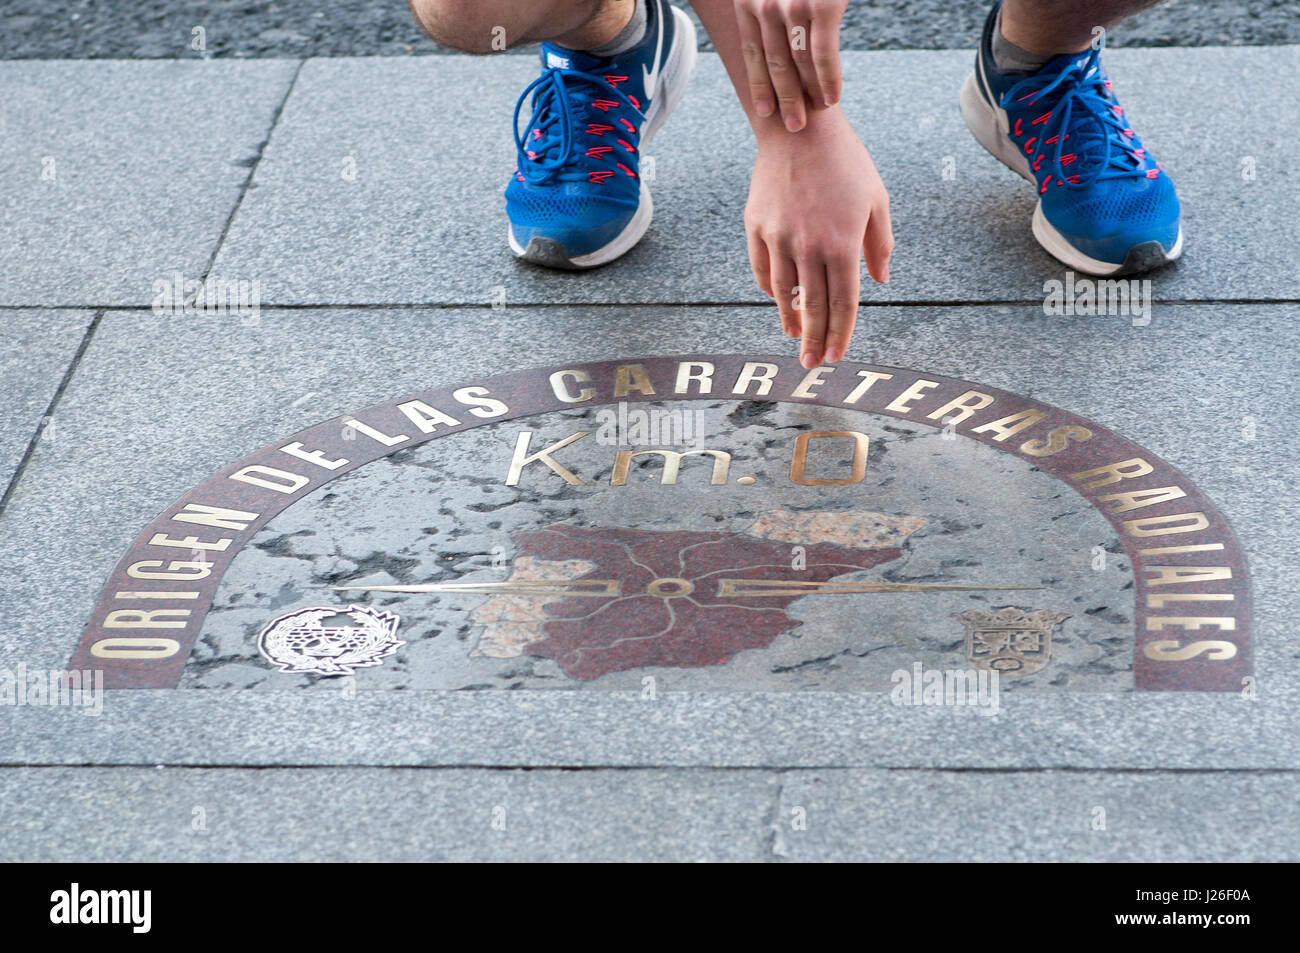 Madrid Kilometre Zero Km 0 stone indicating the geographical center of  Spain from which all six national roads are measured Stock Photo - Alamy